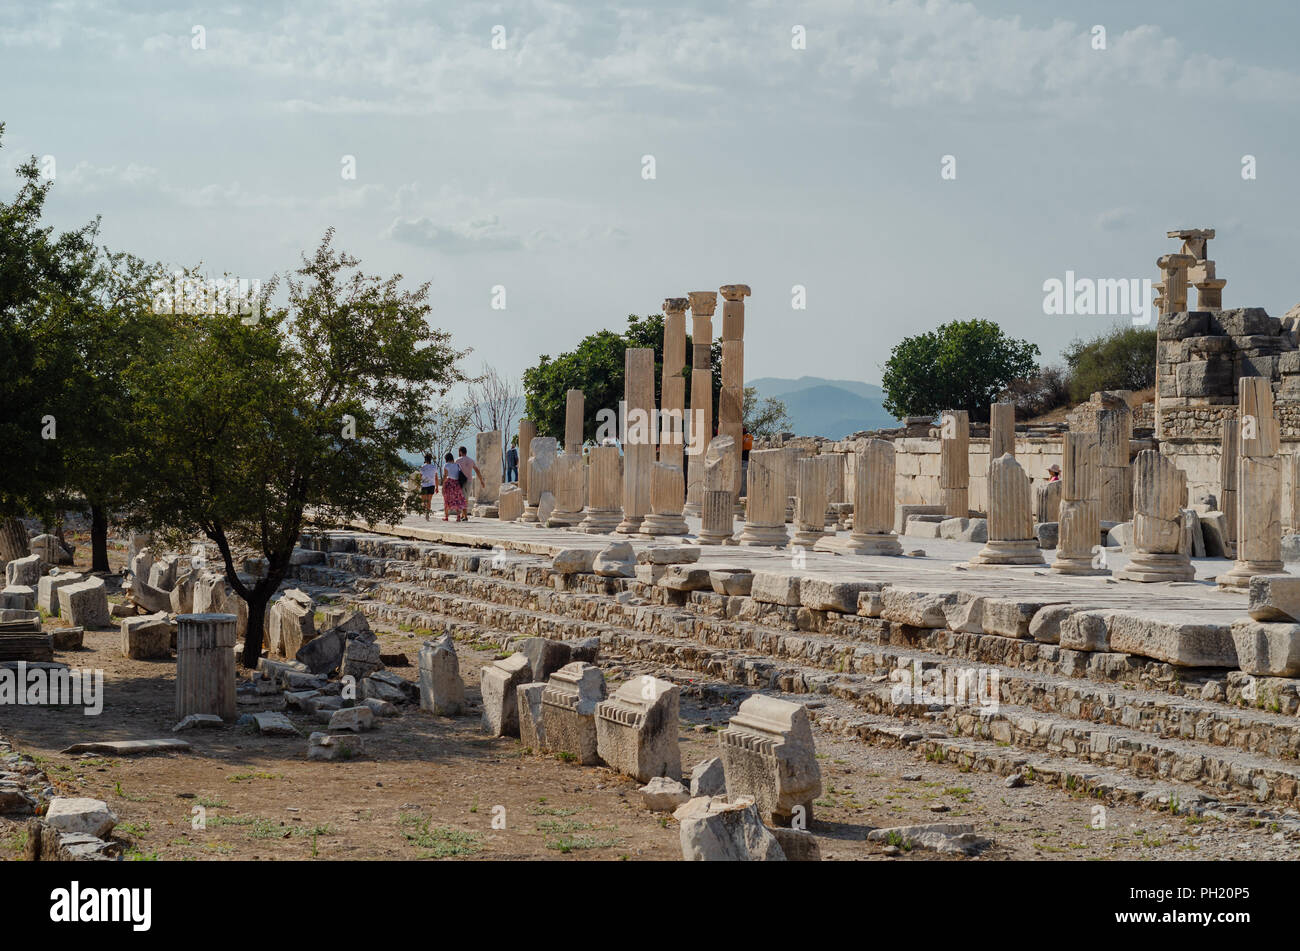 EPHESUS, TURKEY - AUGUST 19, 2018: The ancient city of Ephesus is visited by thousands of tourists every year.( Ephesus is a UNESCO World Heritage sit Stock Photo